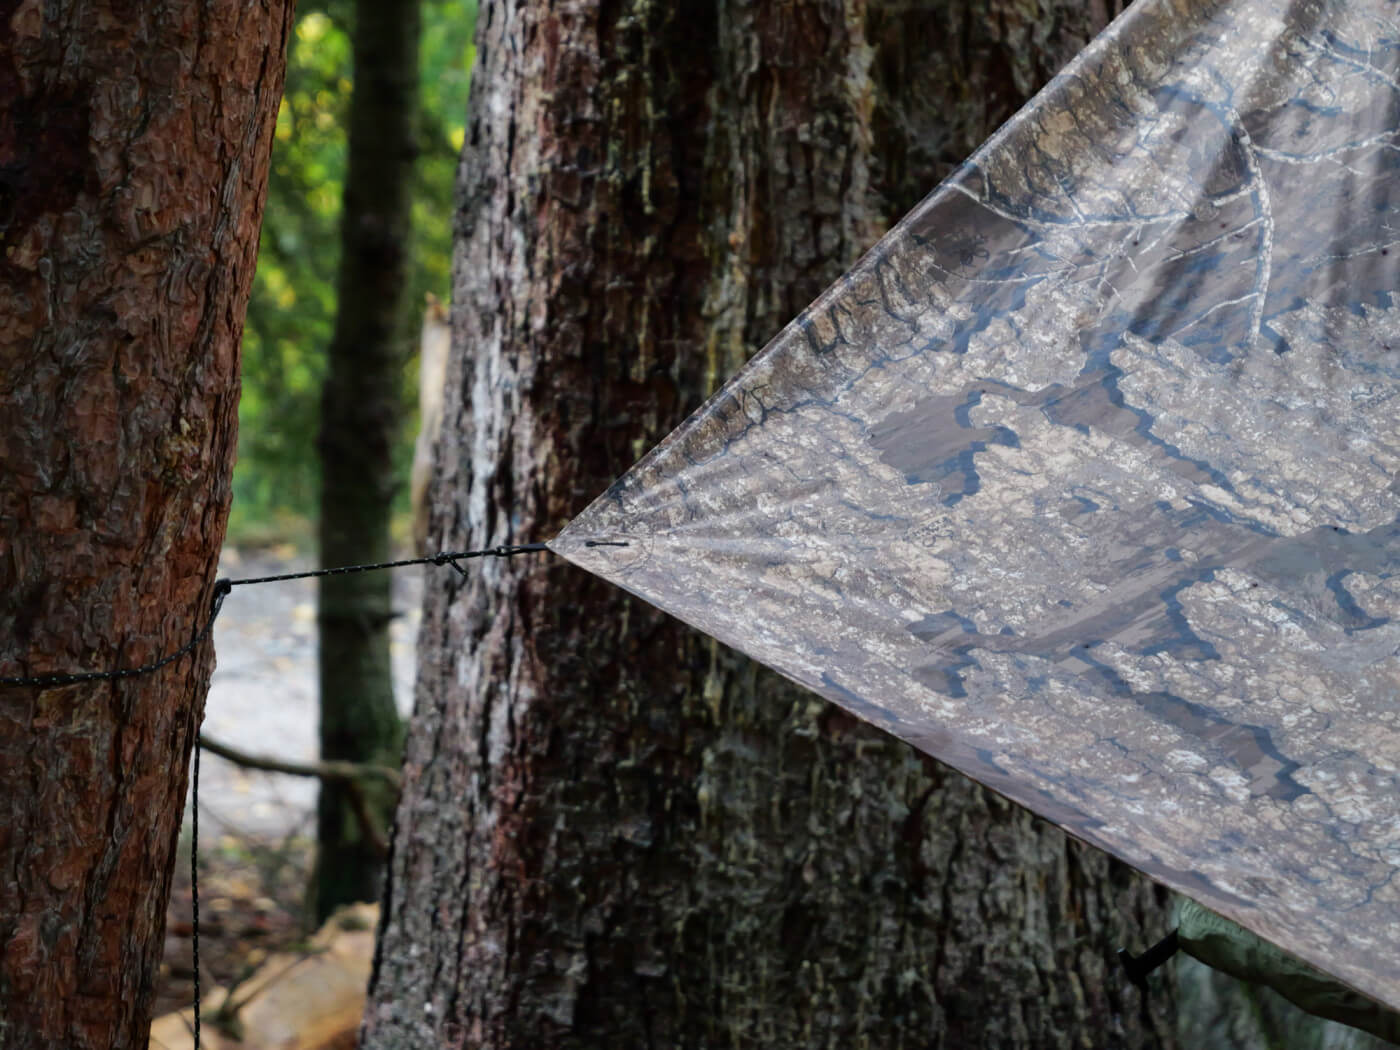 Best camo for stealth camping, realtree timber